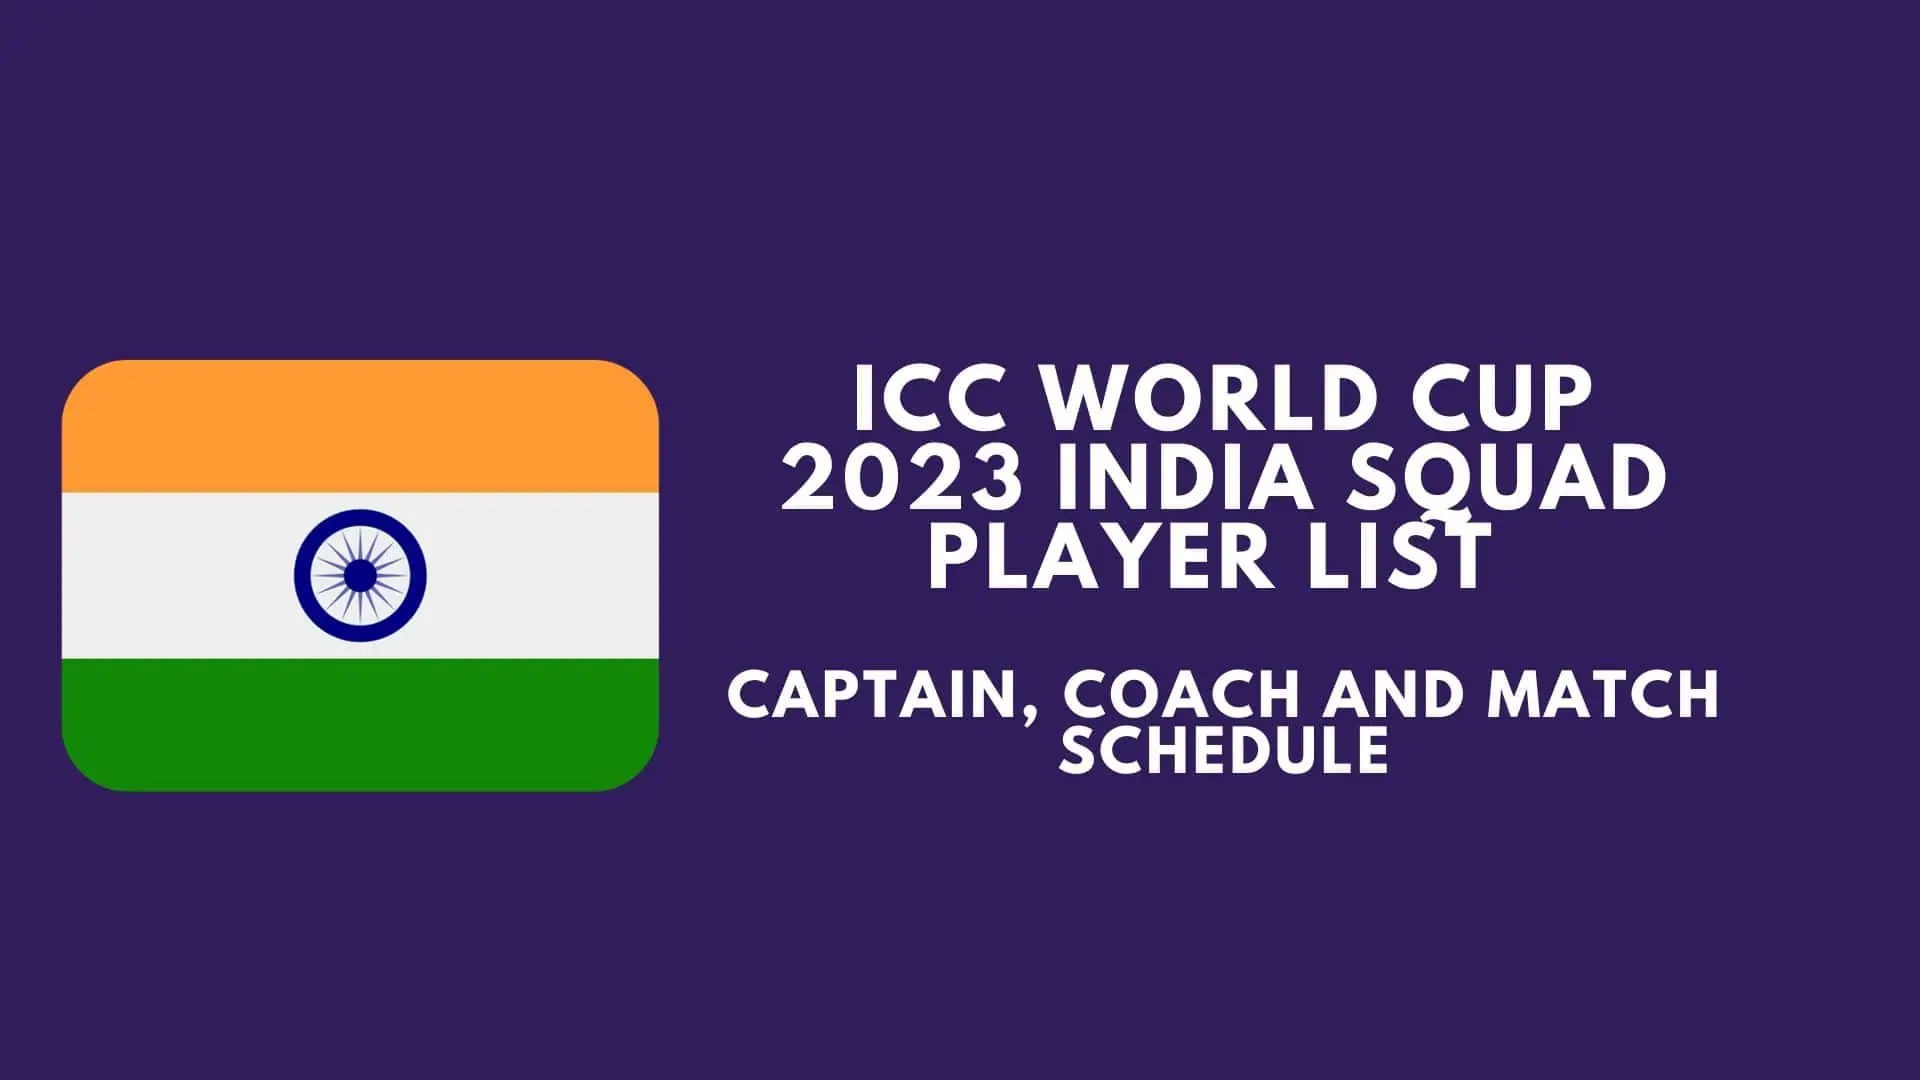 ICC World Cup 2023 India Squad Player List, Captain, Coach and Match Schedule